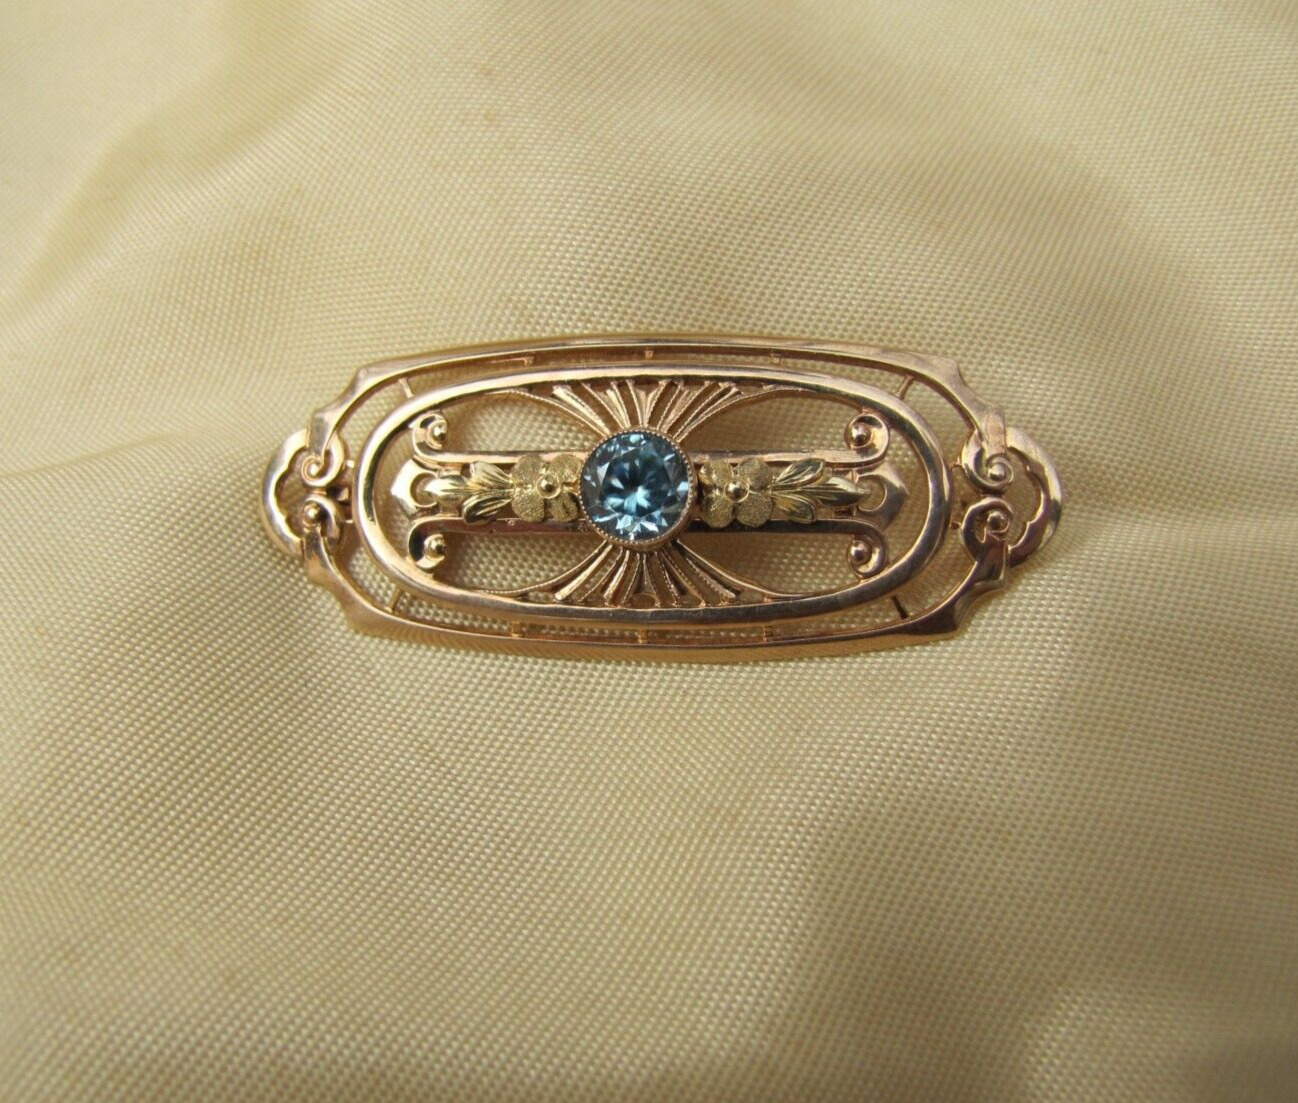 Antique Victorian 10k gold and Zircon brooch - image 1